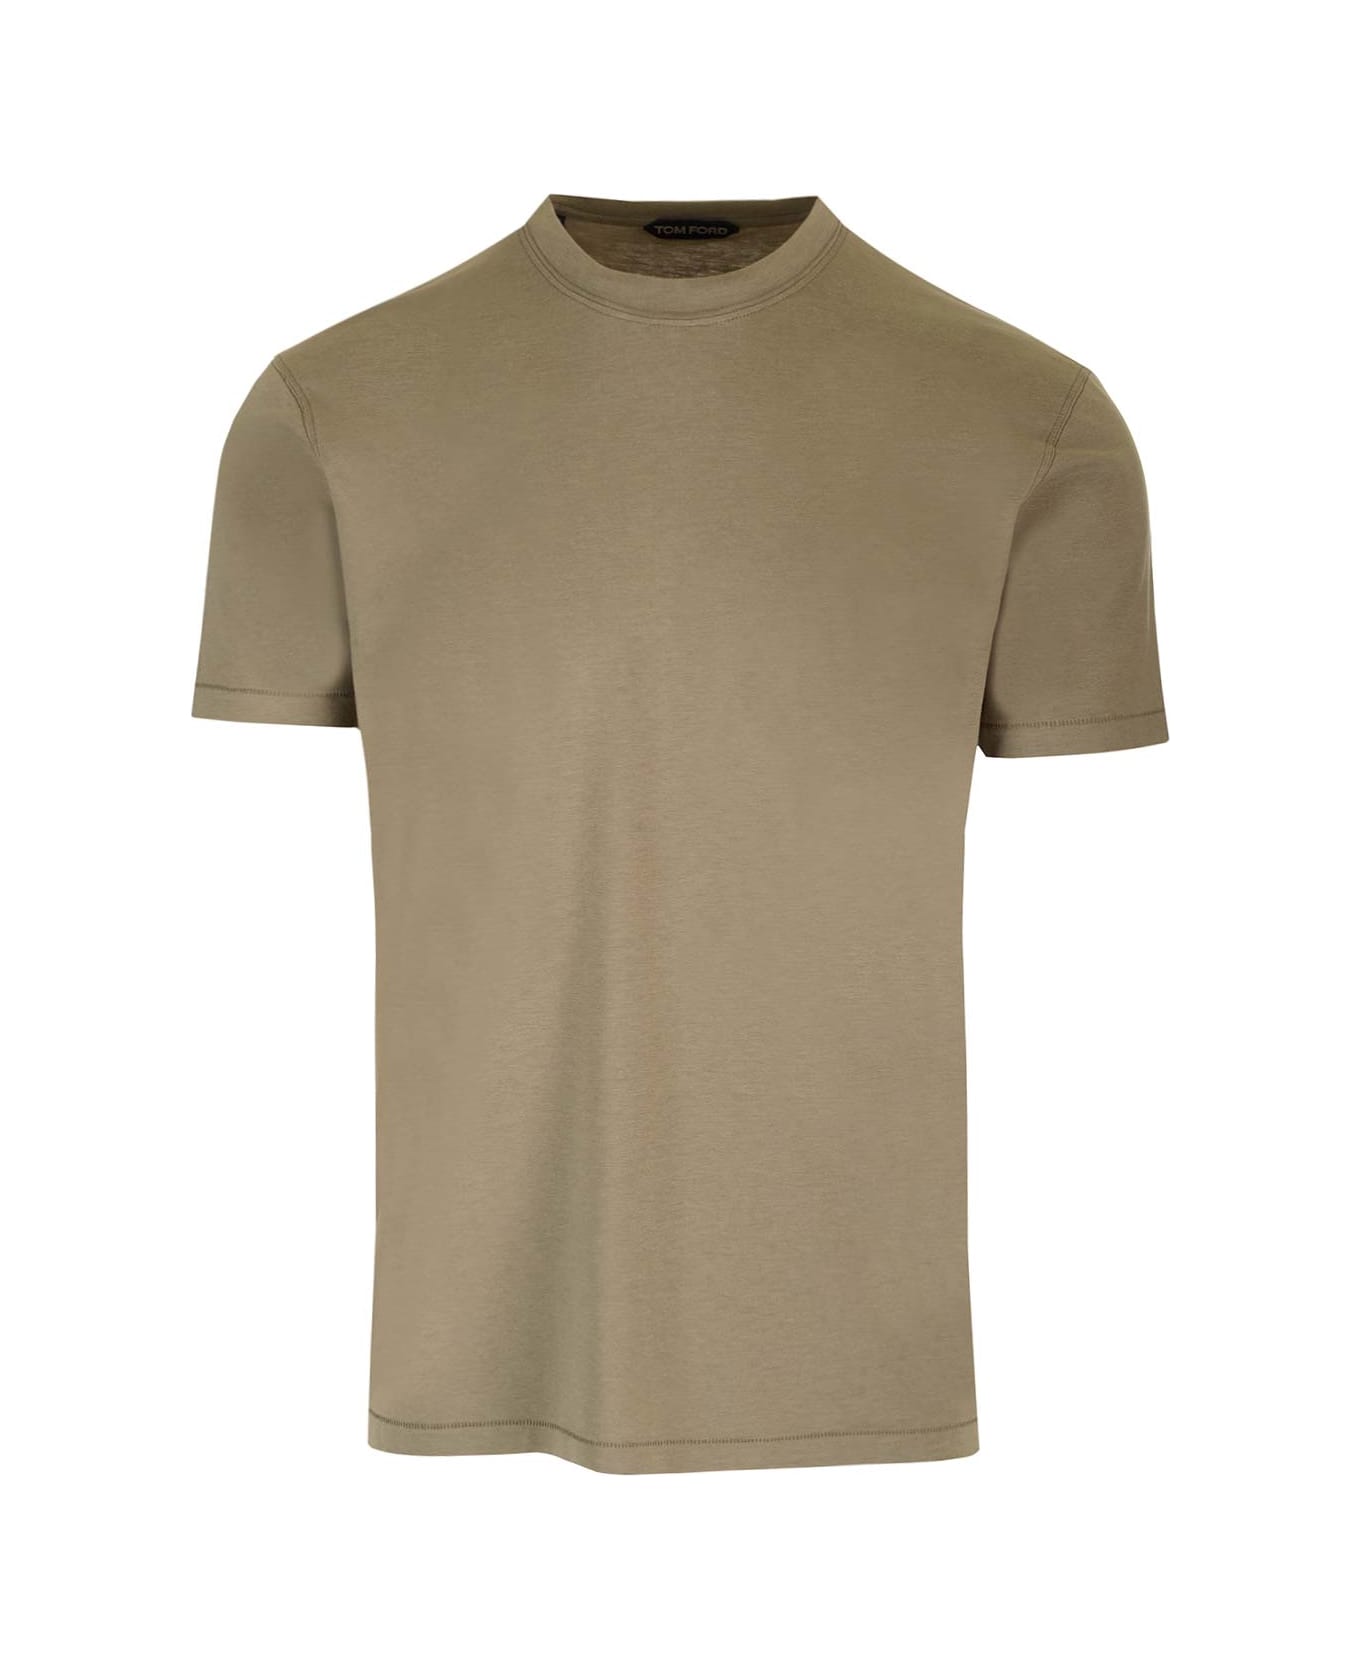 Tom Ford Military Green T-shirt - Pale army